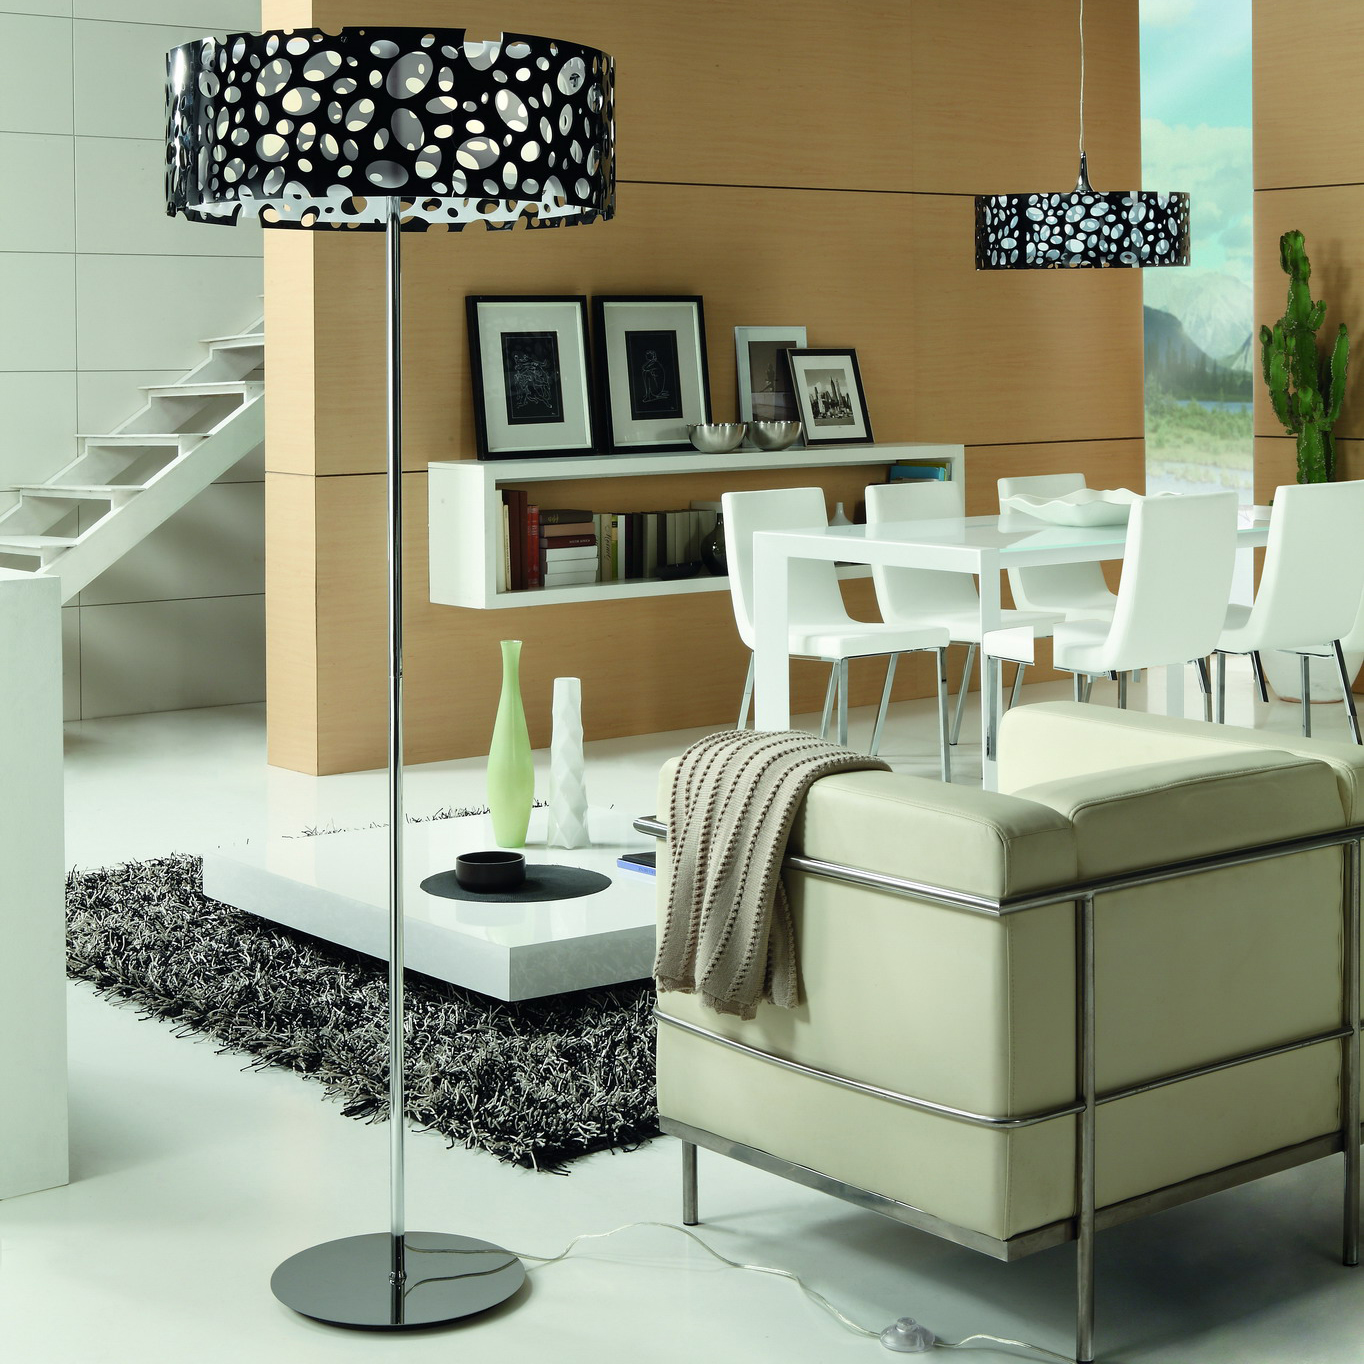 Deco floor lamp MANTRA Moon White And Black 4L